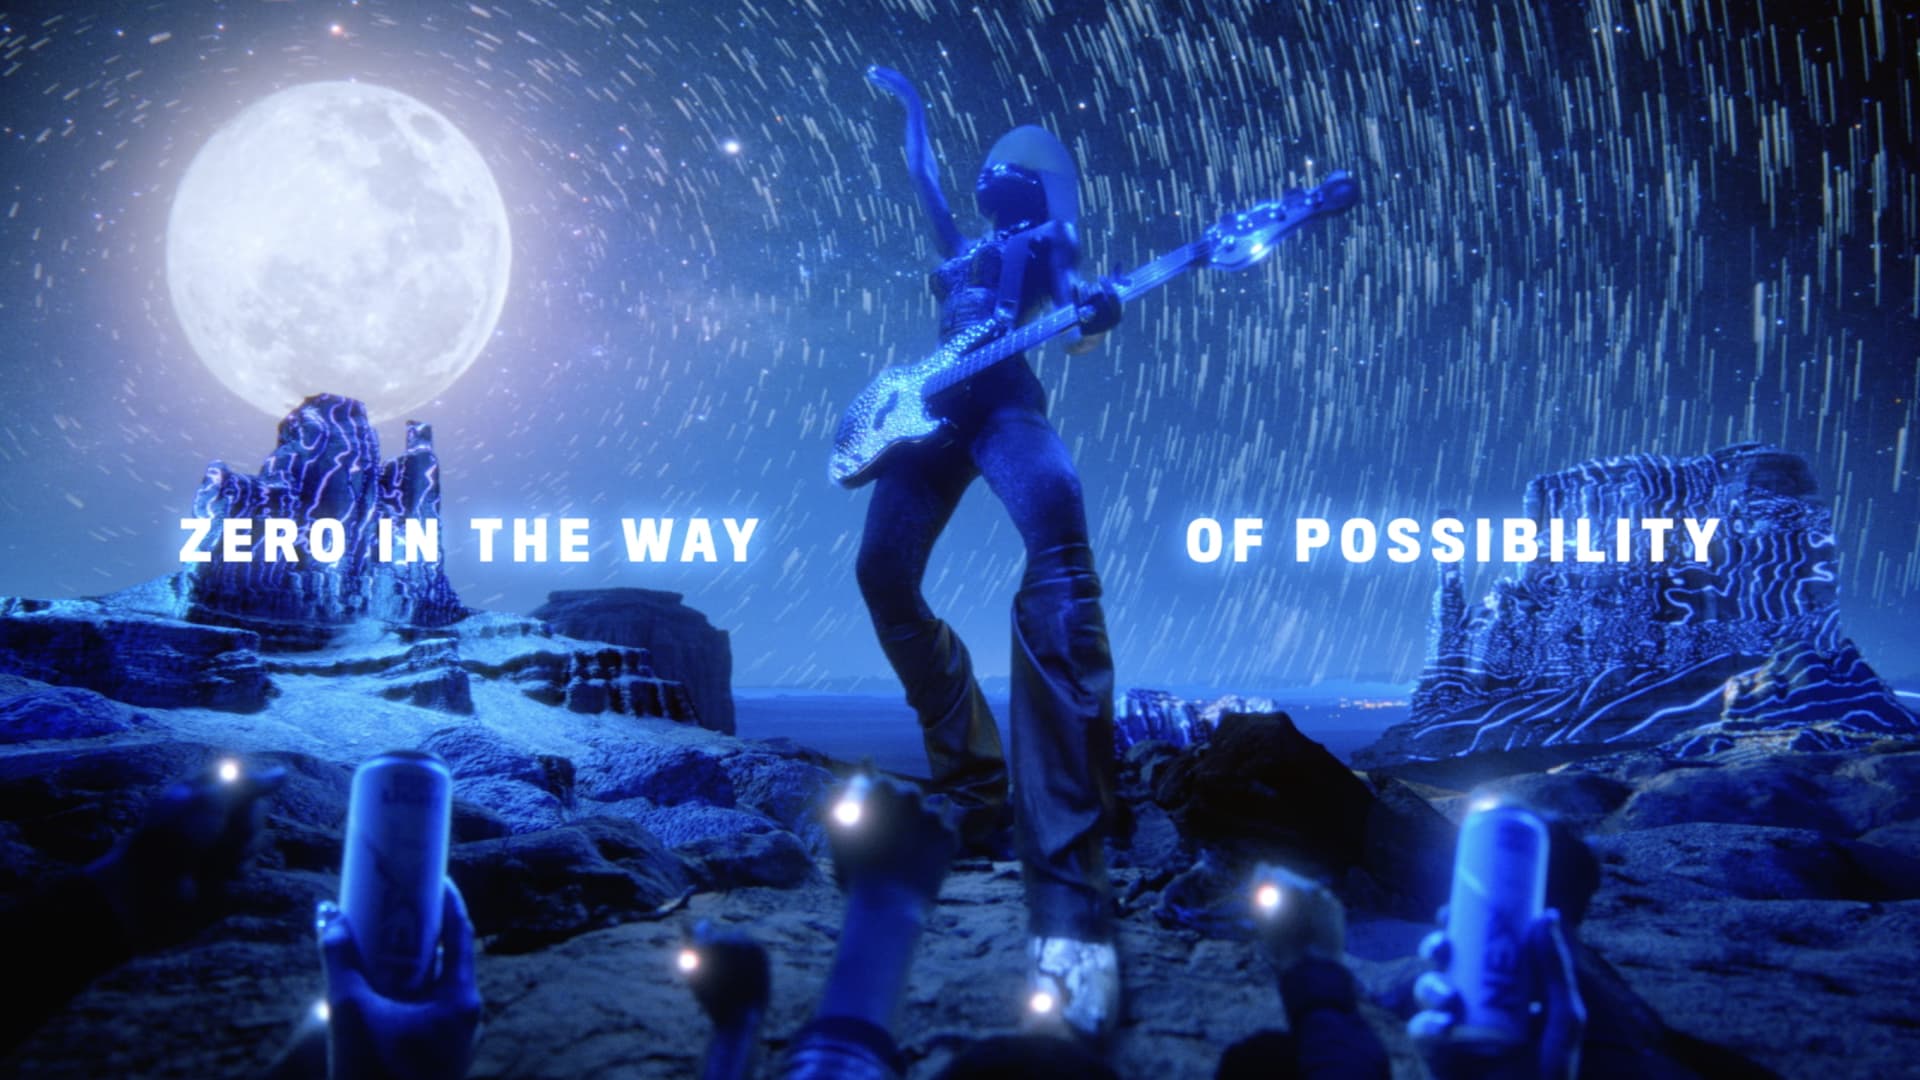 Bud Light Next's Super Bowl ad includes the metaverse